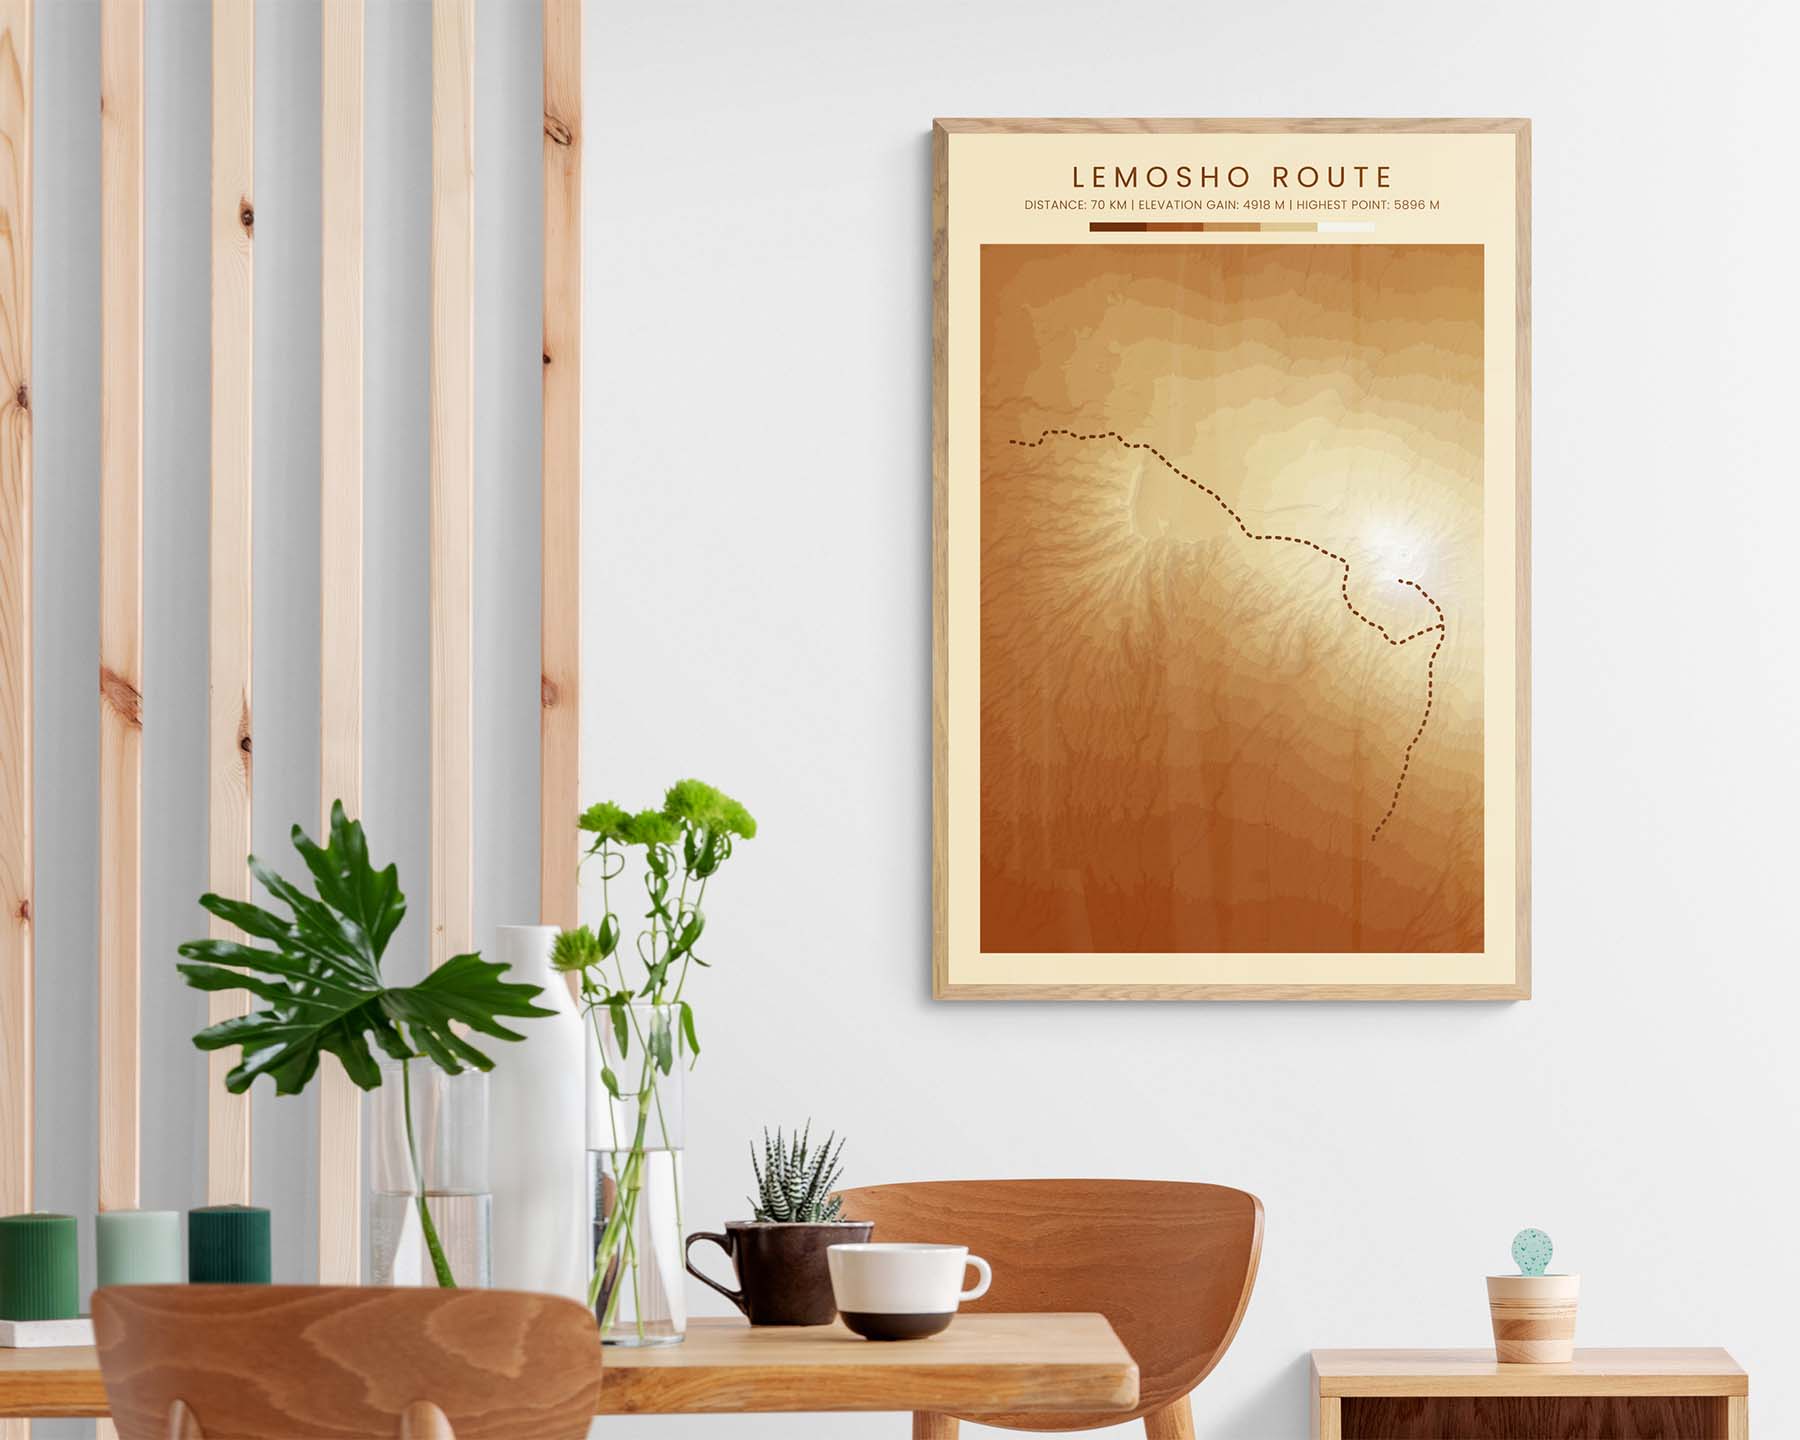 Mount Kilimanjaro (Machame Route) Trail Art with Topographic Map in Modern Room Decor